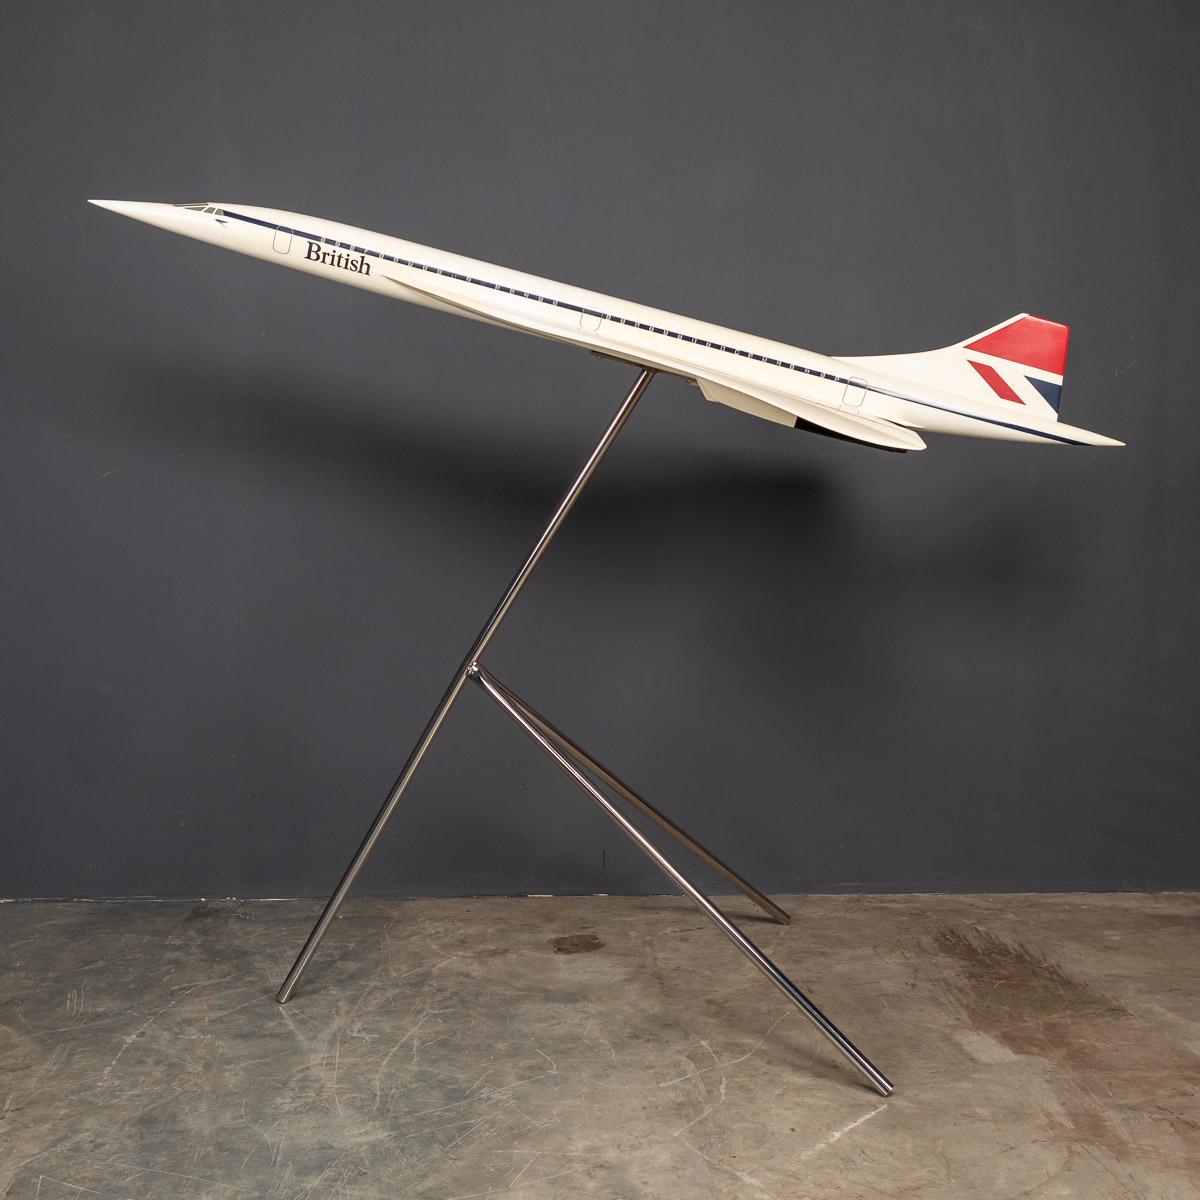 A splendid vintage fiberglass and plastic composite model of a Concorde in full British Airways livery mounted on a tripod stand by Space Models, circa 1990. This scaled down aircraft model was presented to one of BA's top travel agents to use for